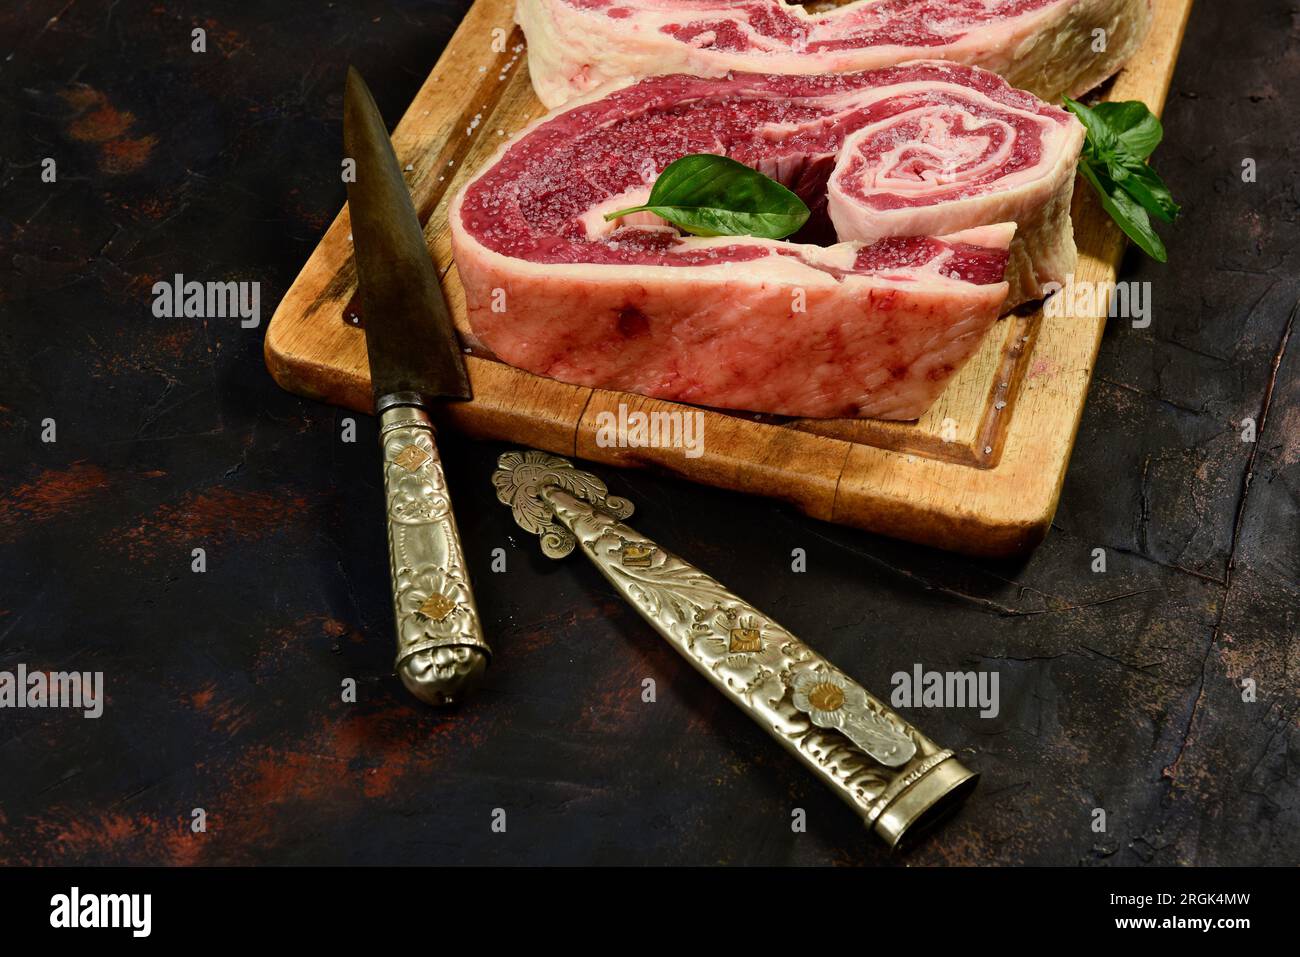 Cattle Beef ribs prepared on the table Stock Photo